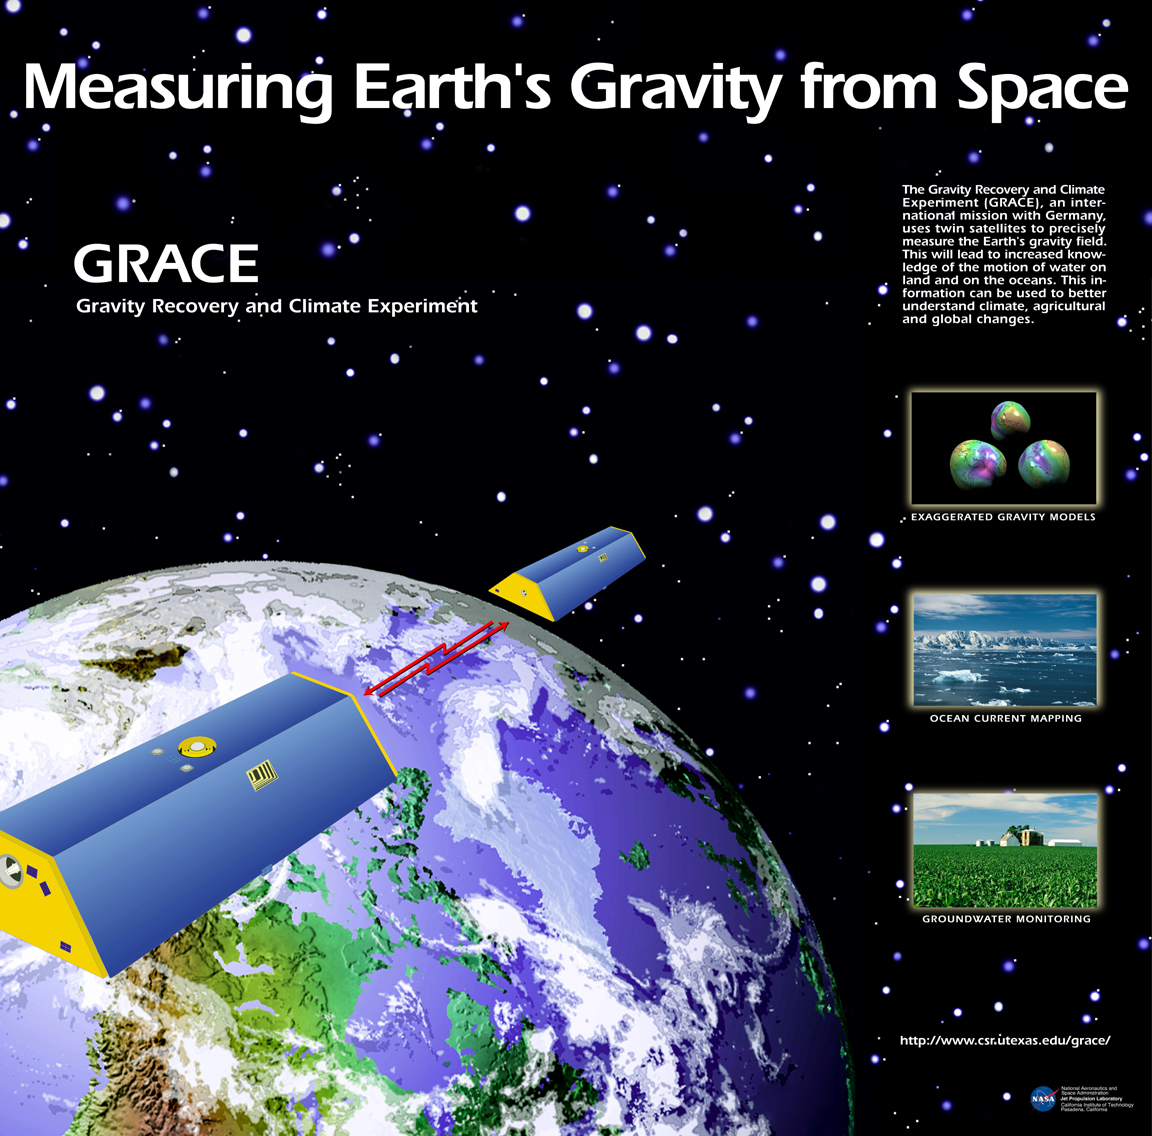 Measuring Earth's Gravity from Space exhibit